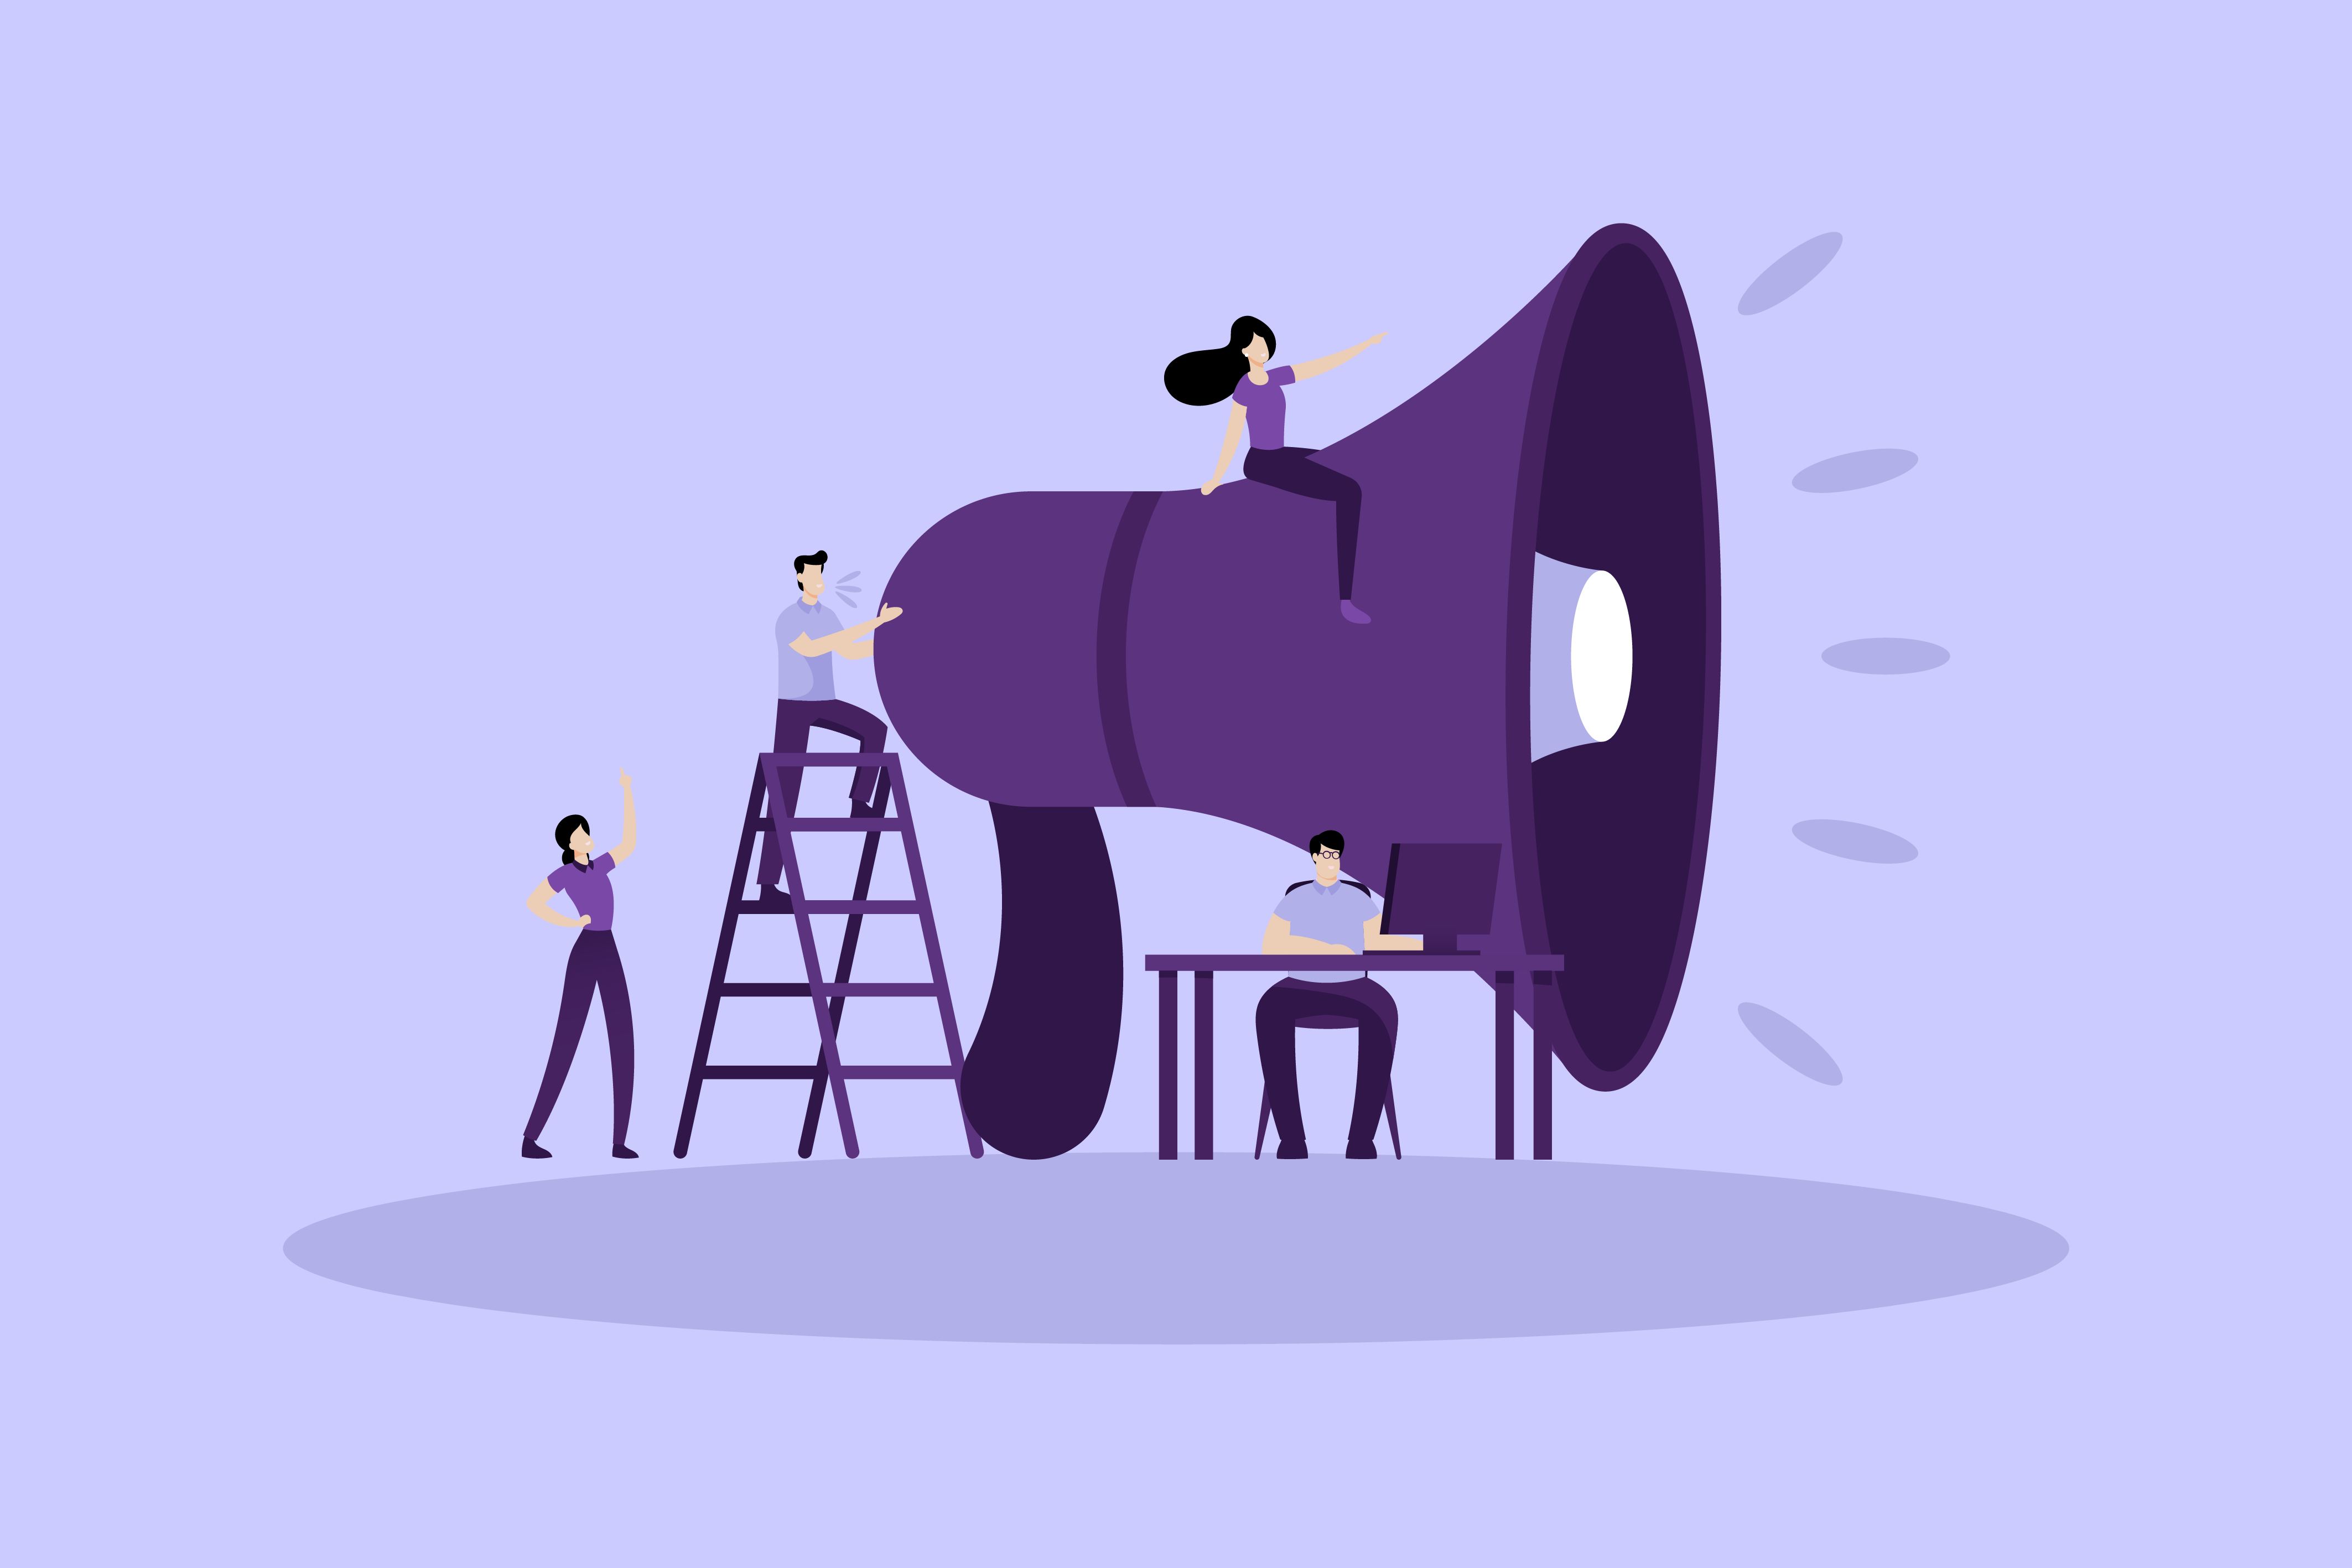 A team of people engaging with a large megaphone in various ways, suggesting teamwork and communication themes on a purple background for a blog post.